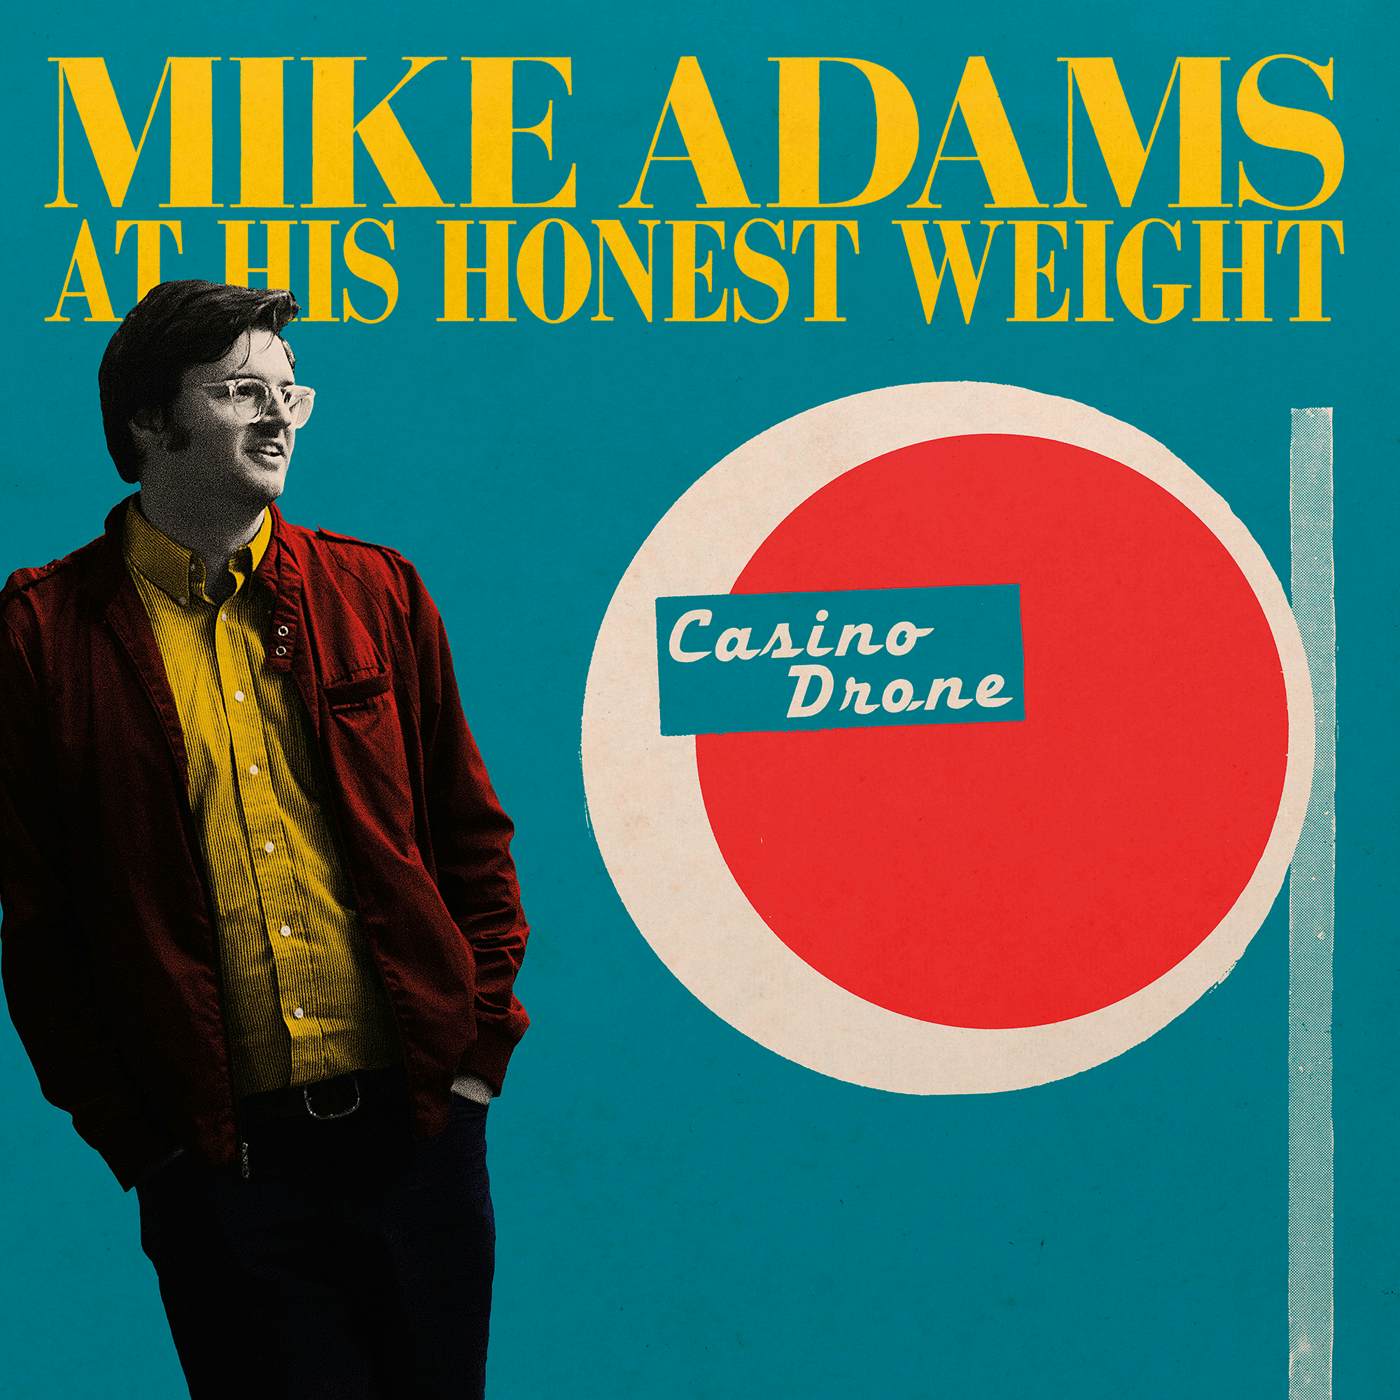 Mike Adams at His Honest Weight Casino Drone Vinyl Record